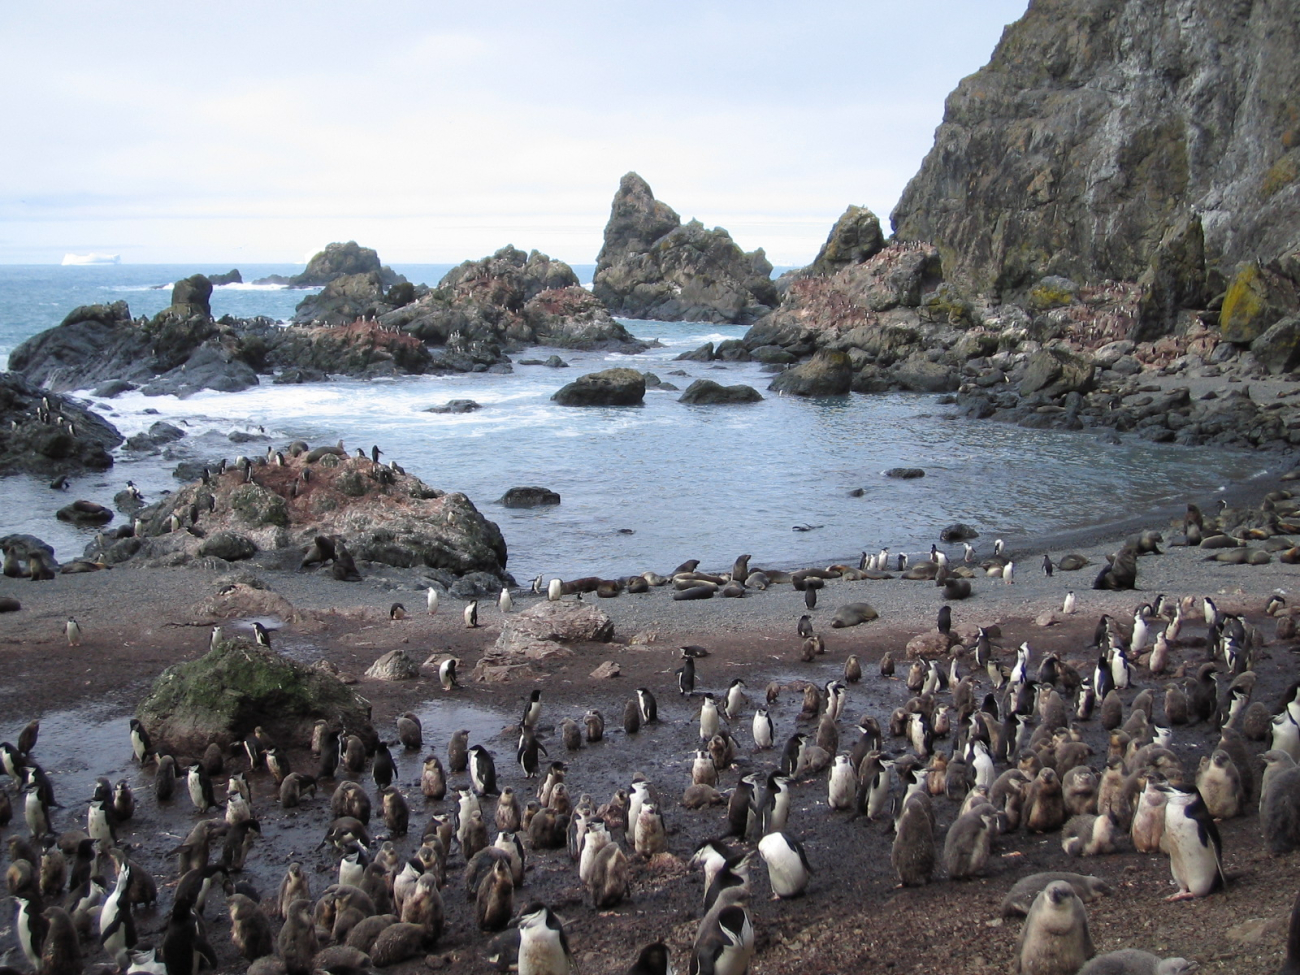 A chinstrap penguin colony at North Cove, Seal Island, with Antarctic furseals nearby